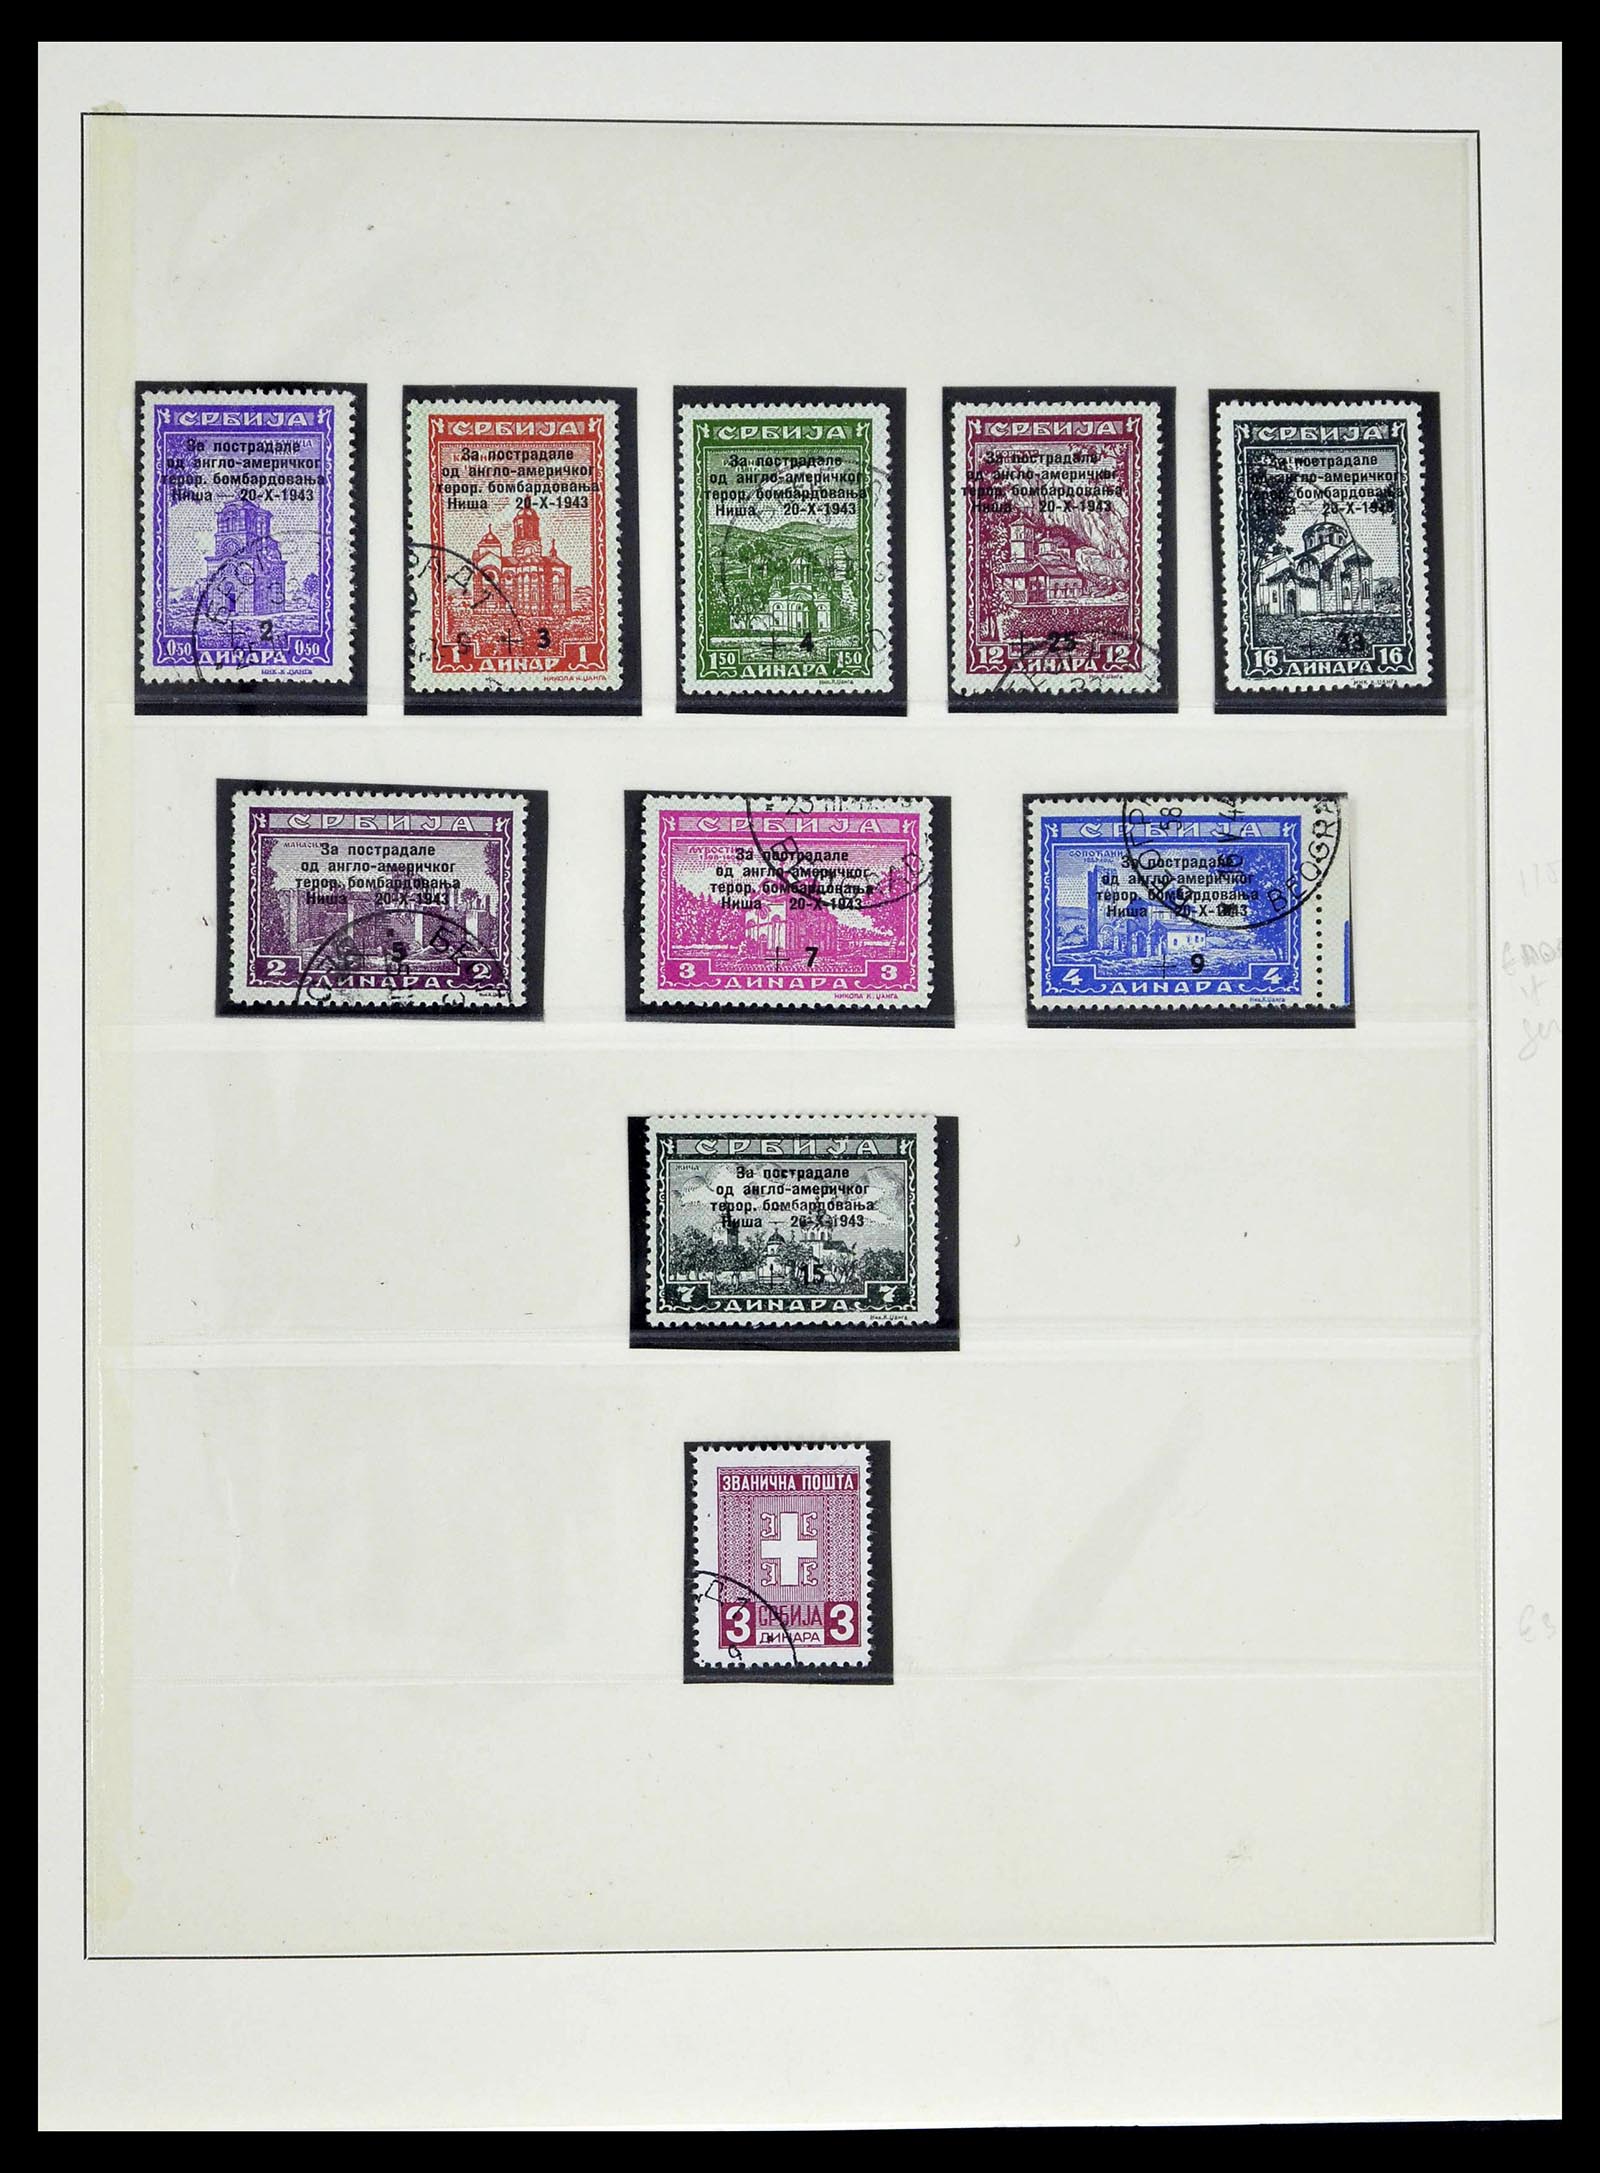 39396 0026 - Stamp collection 39396 German occupation WW II 1939-1945.